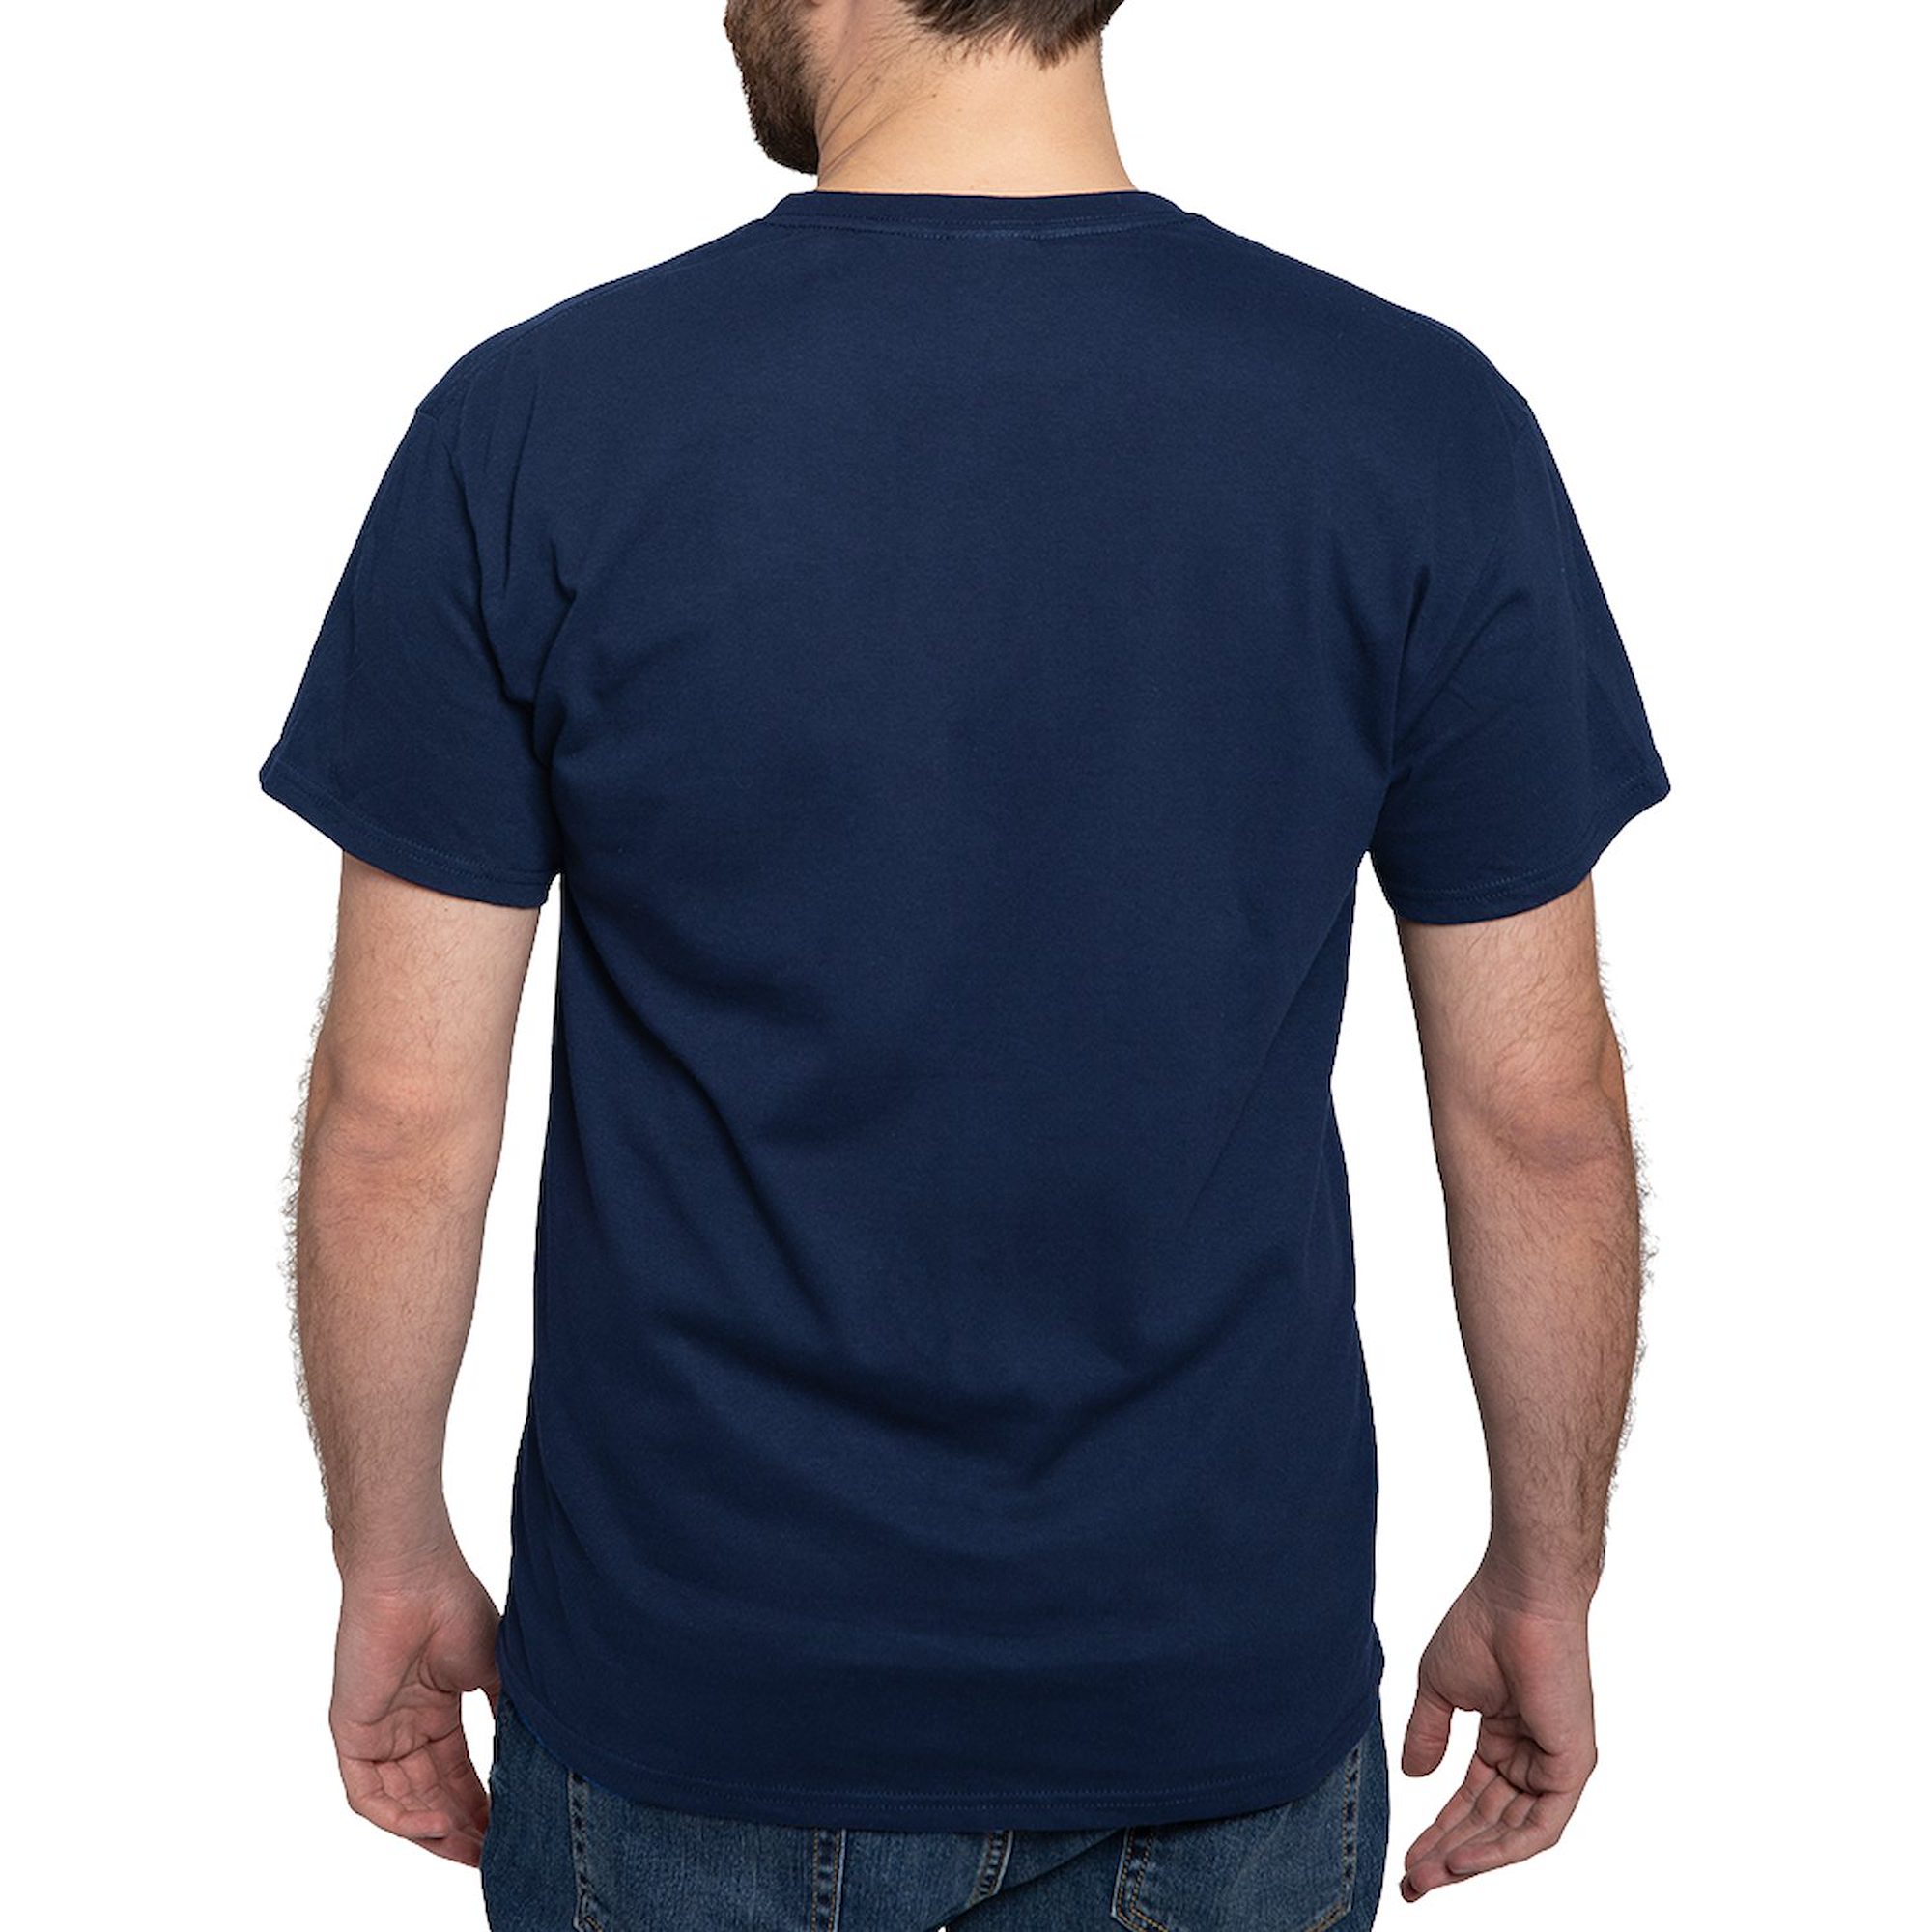 CafePress - Stage Crew White T Shirt - 100% Cotton T-Shirt - image 2 of 4